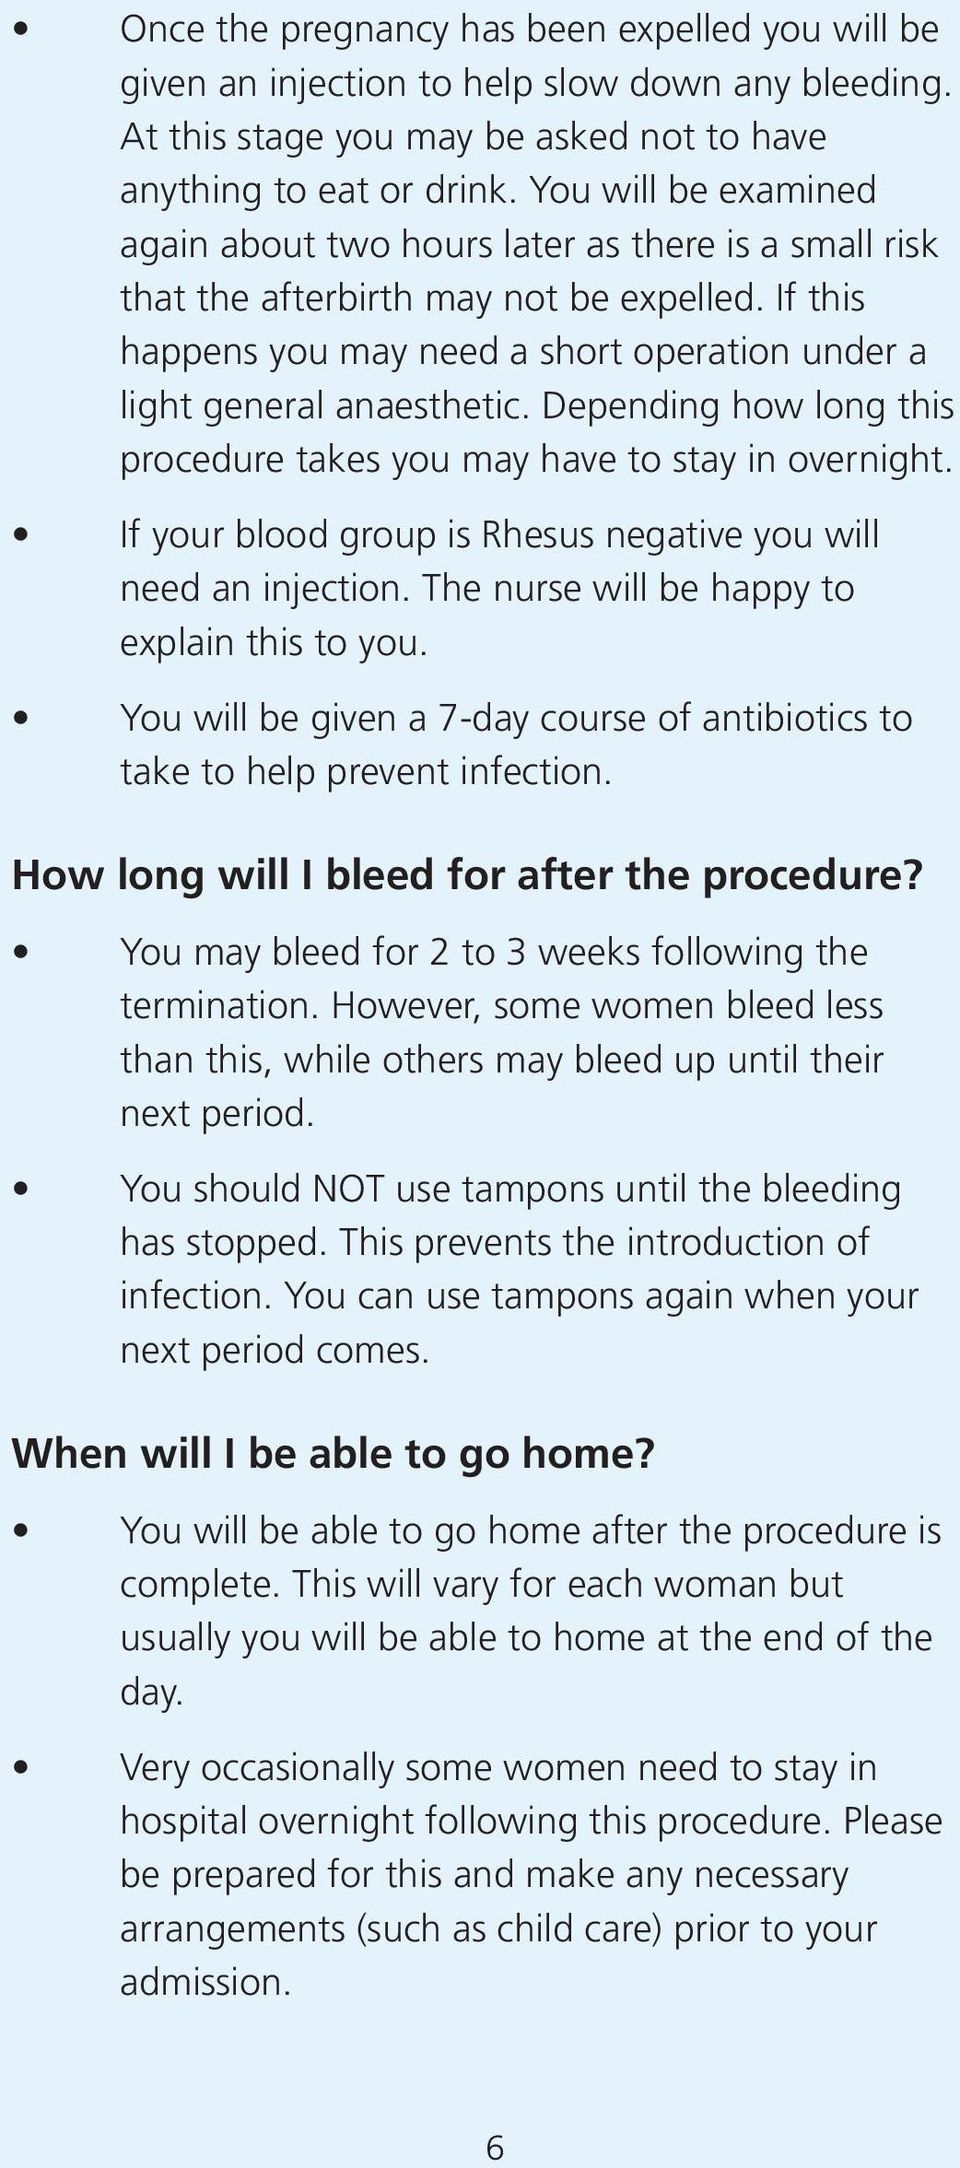 Depending how long this procedure takes you may have to stay in overnight. If your blood group is Rhesus negative you will need an injection. The nurse will be happy to explain this to you.